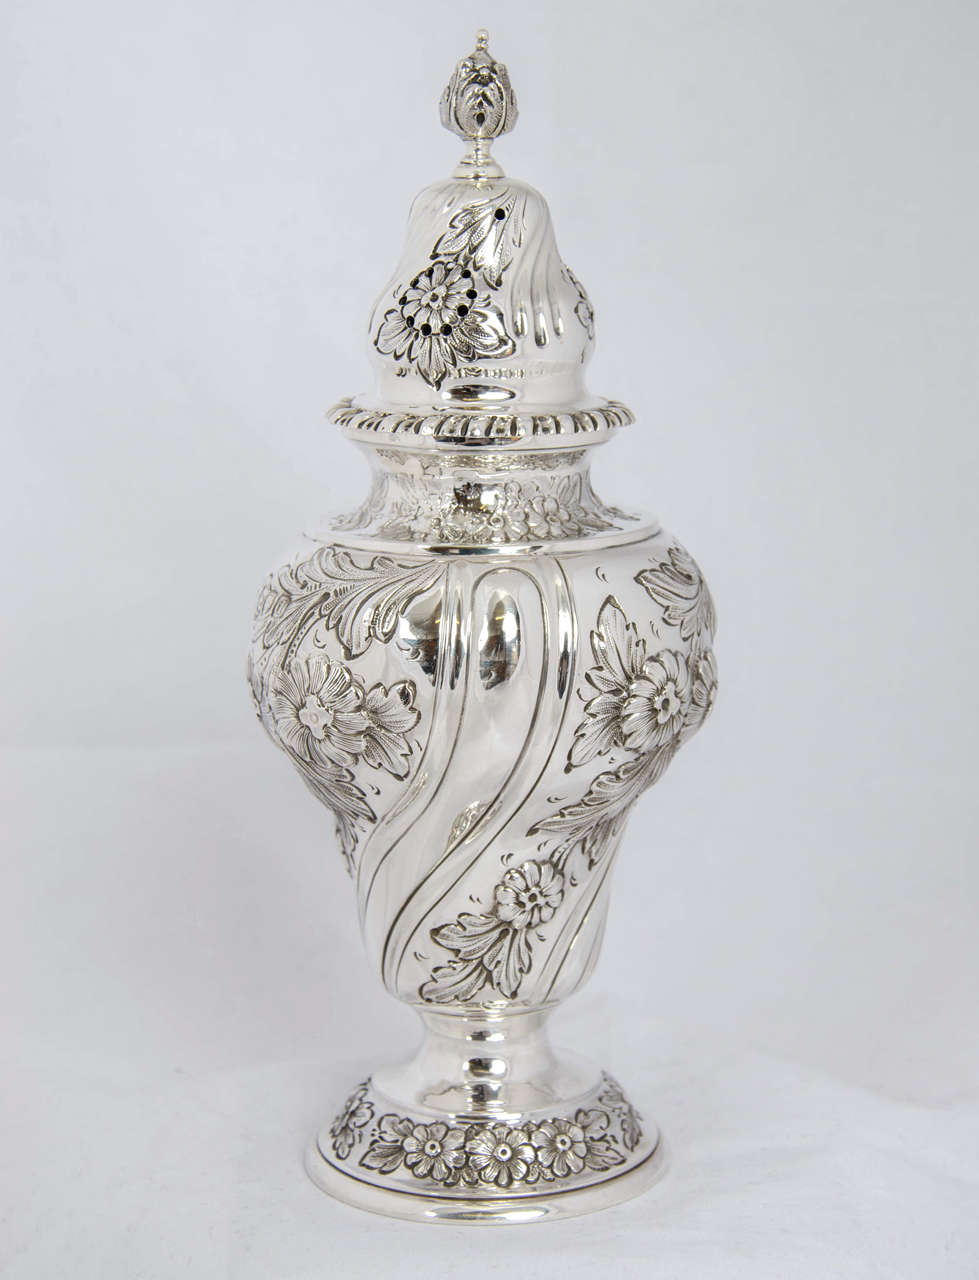 A Victorian silver sugar shaker or caster, made in London 1899 by the firm of Walter Walker & Brownfield Tolhurst.  It is beatifully embossed with flowers and swirls and stands 19.5cms high.